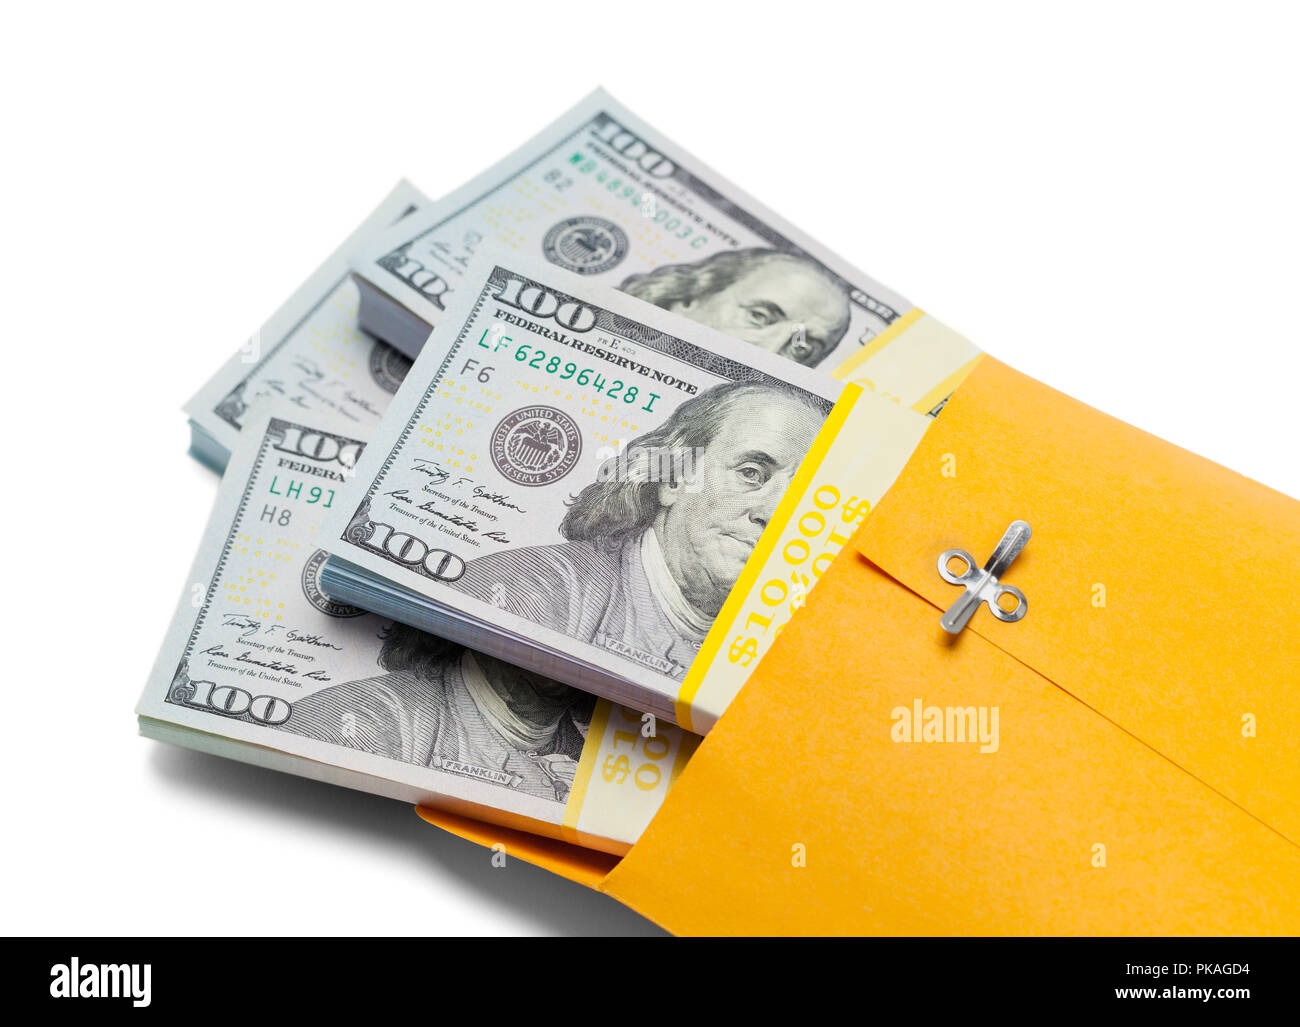 Yellow Envelope Stuffed With Money Isolated on a White Background. Stock Photo